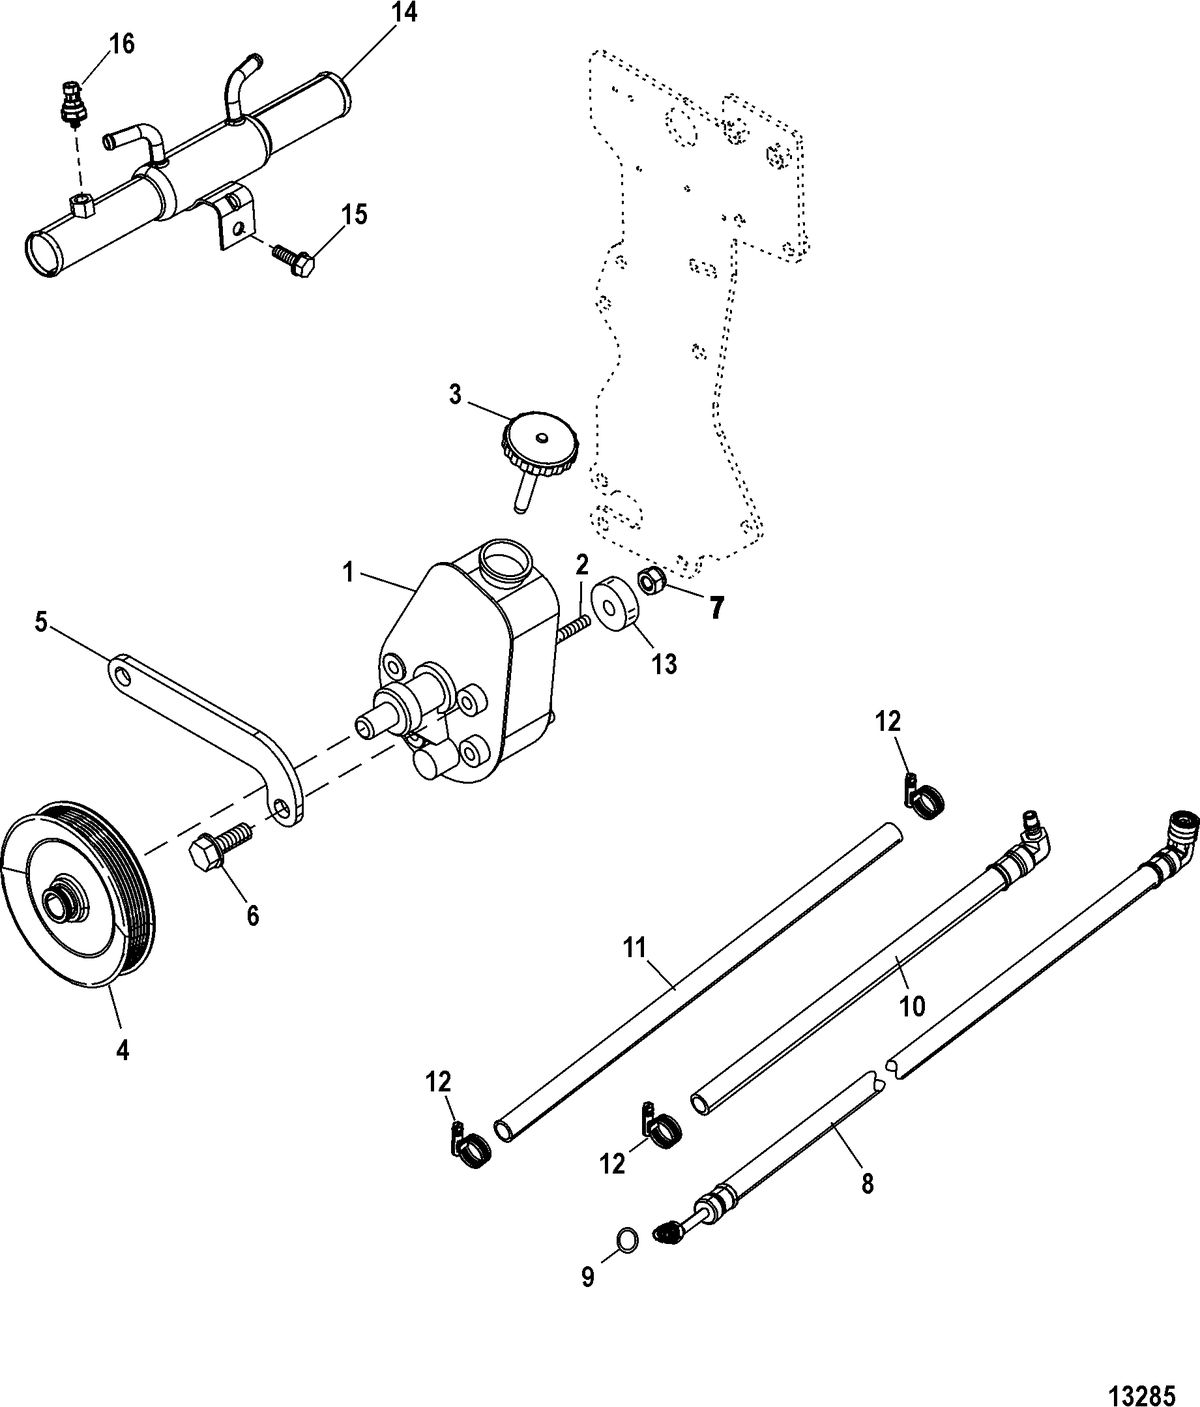 MERCRUISER 5.0L, 350, 377 MAG MPI STERNDRIVE Steering Components